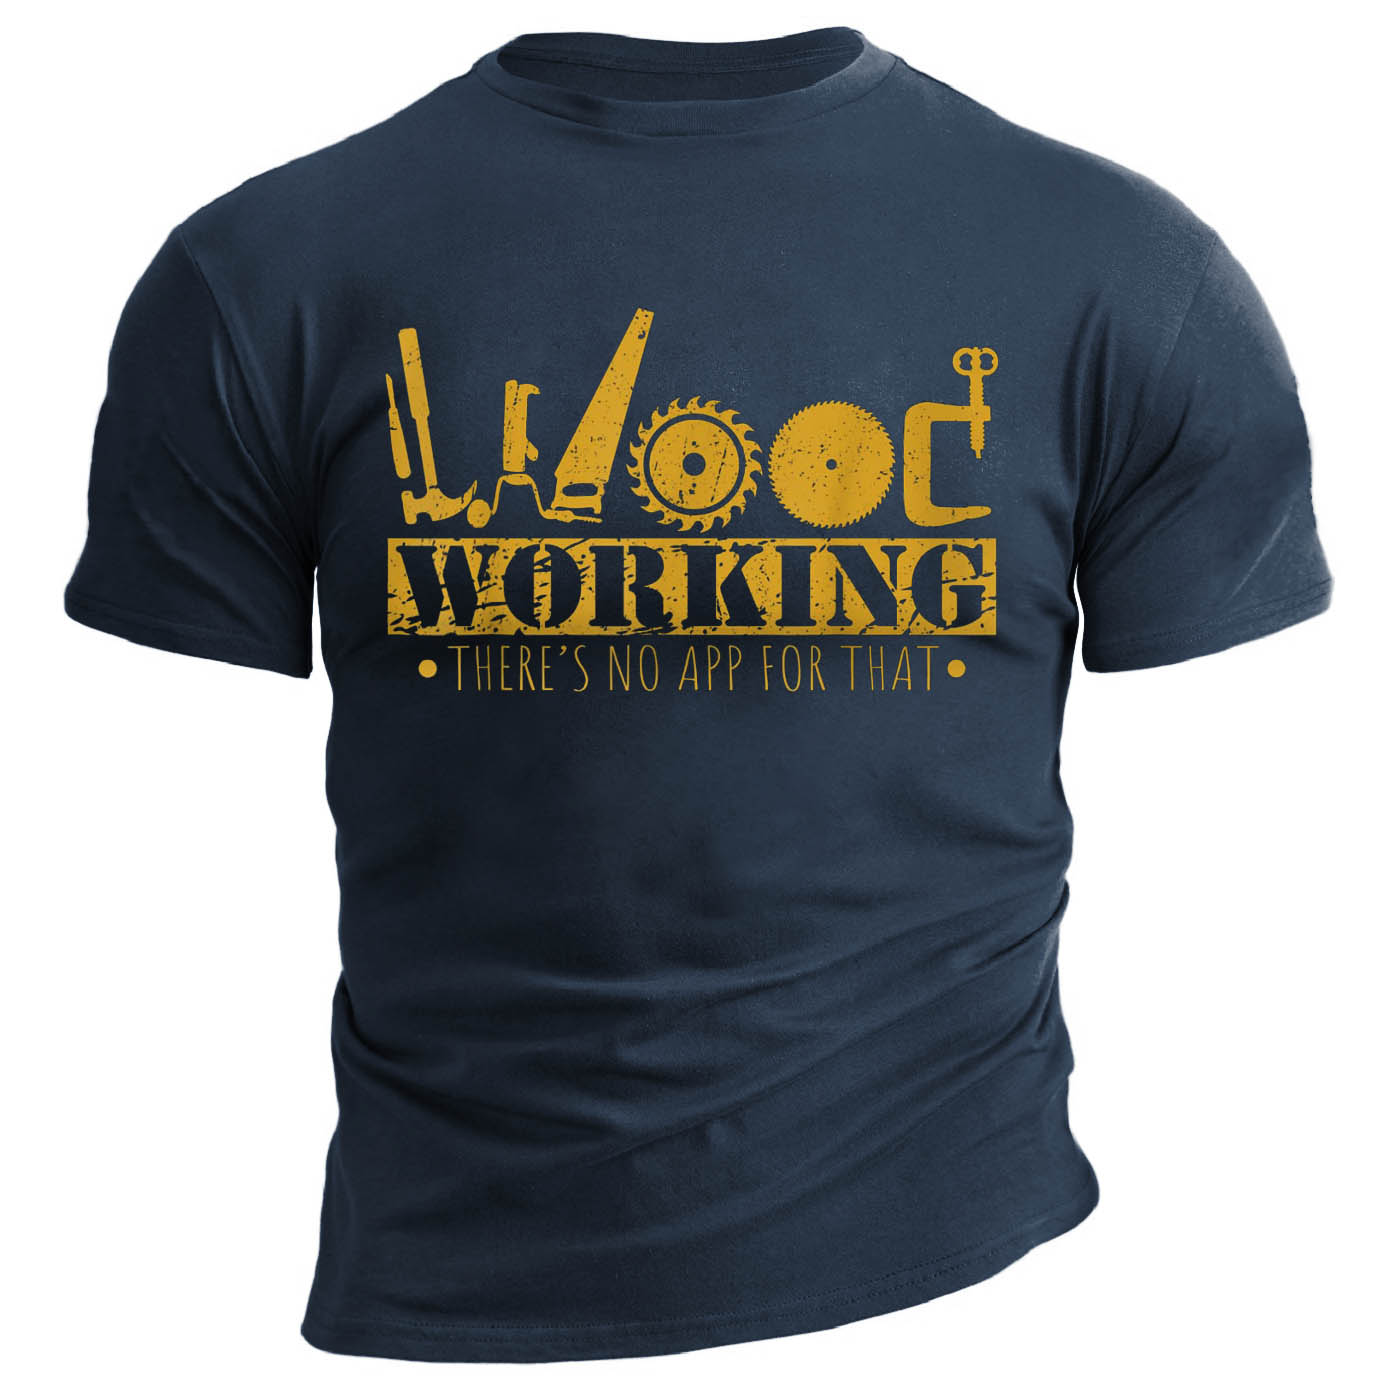 Men's Woodworking Tools Print Chic Cotton T-shirt